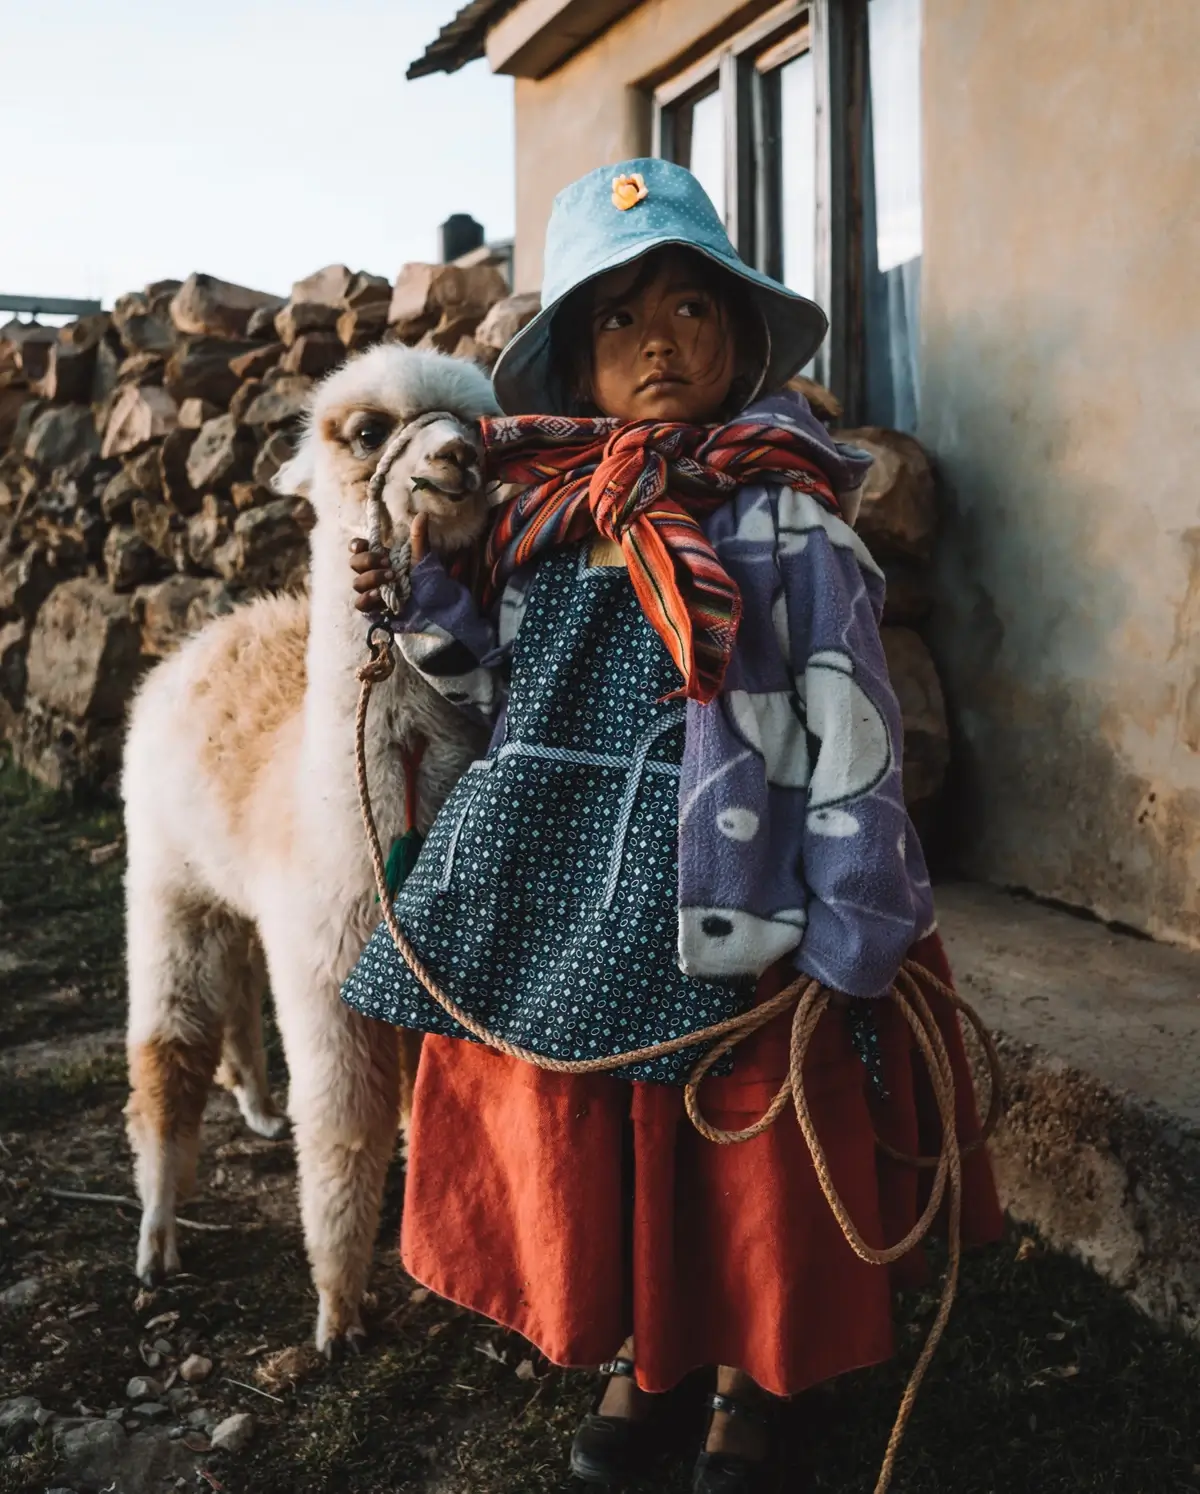 Little girl and her llama in Bolivia